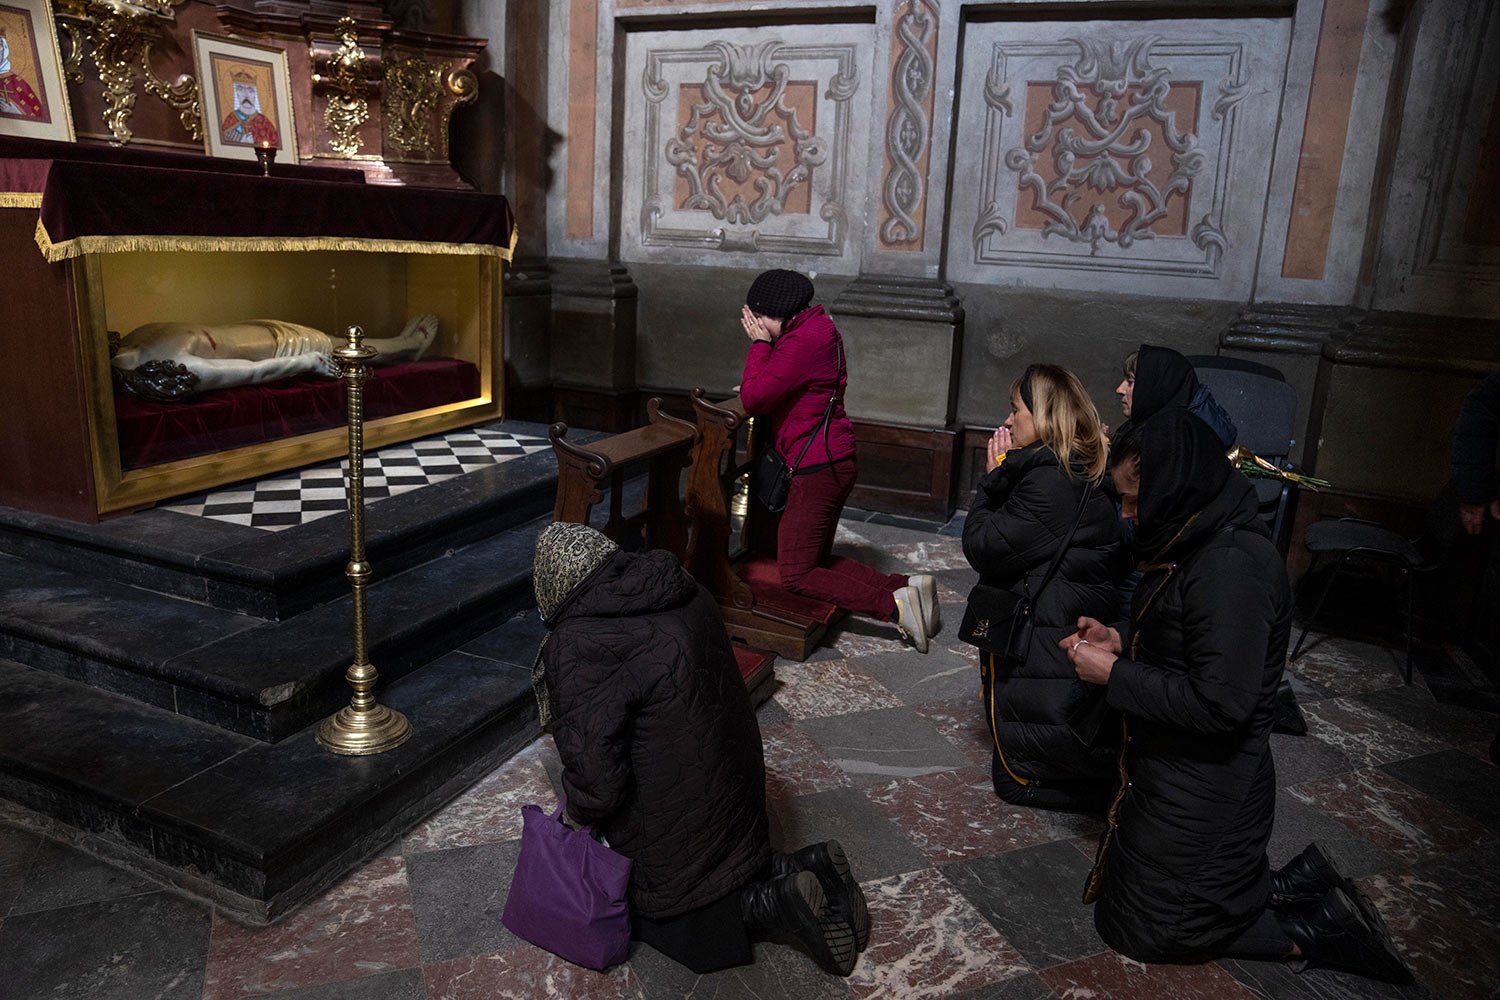  The wife, center, of 44-year-old soldier Tereshko Volodymyr, second right, prays and mourns his death before his funeral ceremony, after he died in action, at the Holy Apostles Peter and Paul Church in Lviv, western Ukraine, Monday, April 4, 2022. (